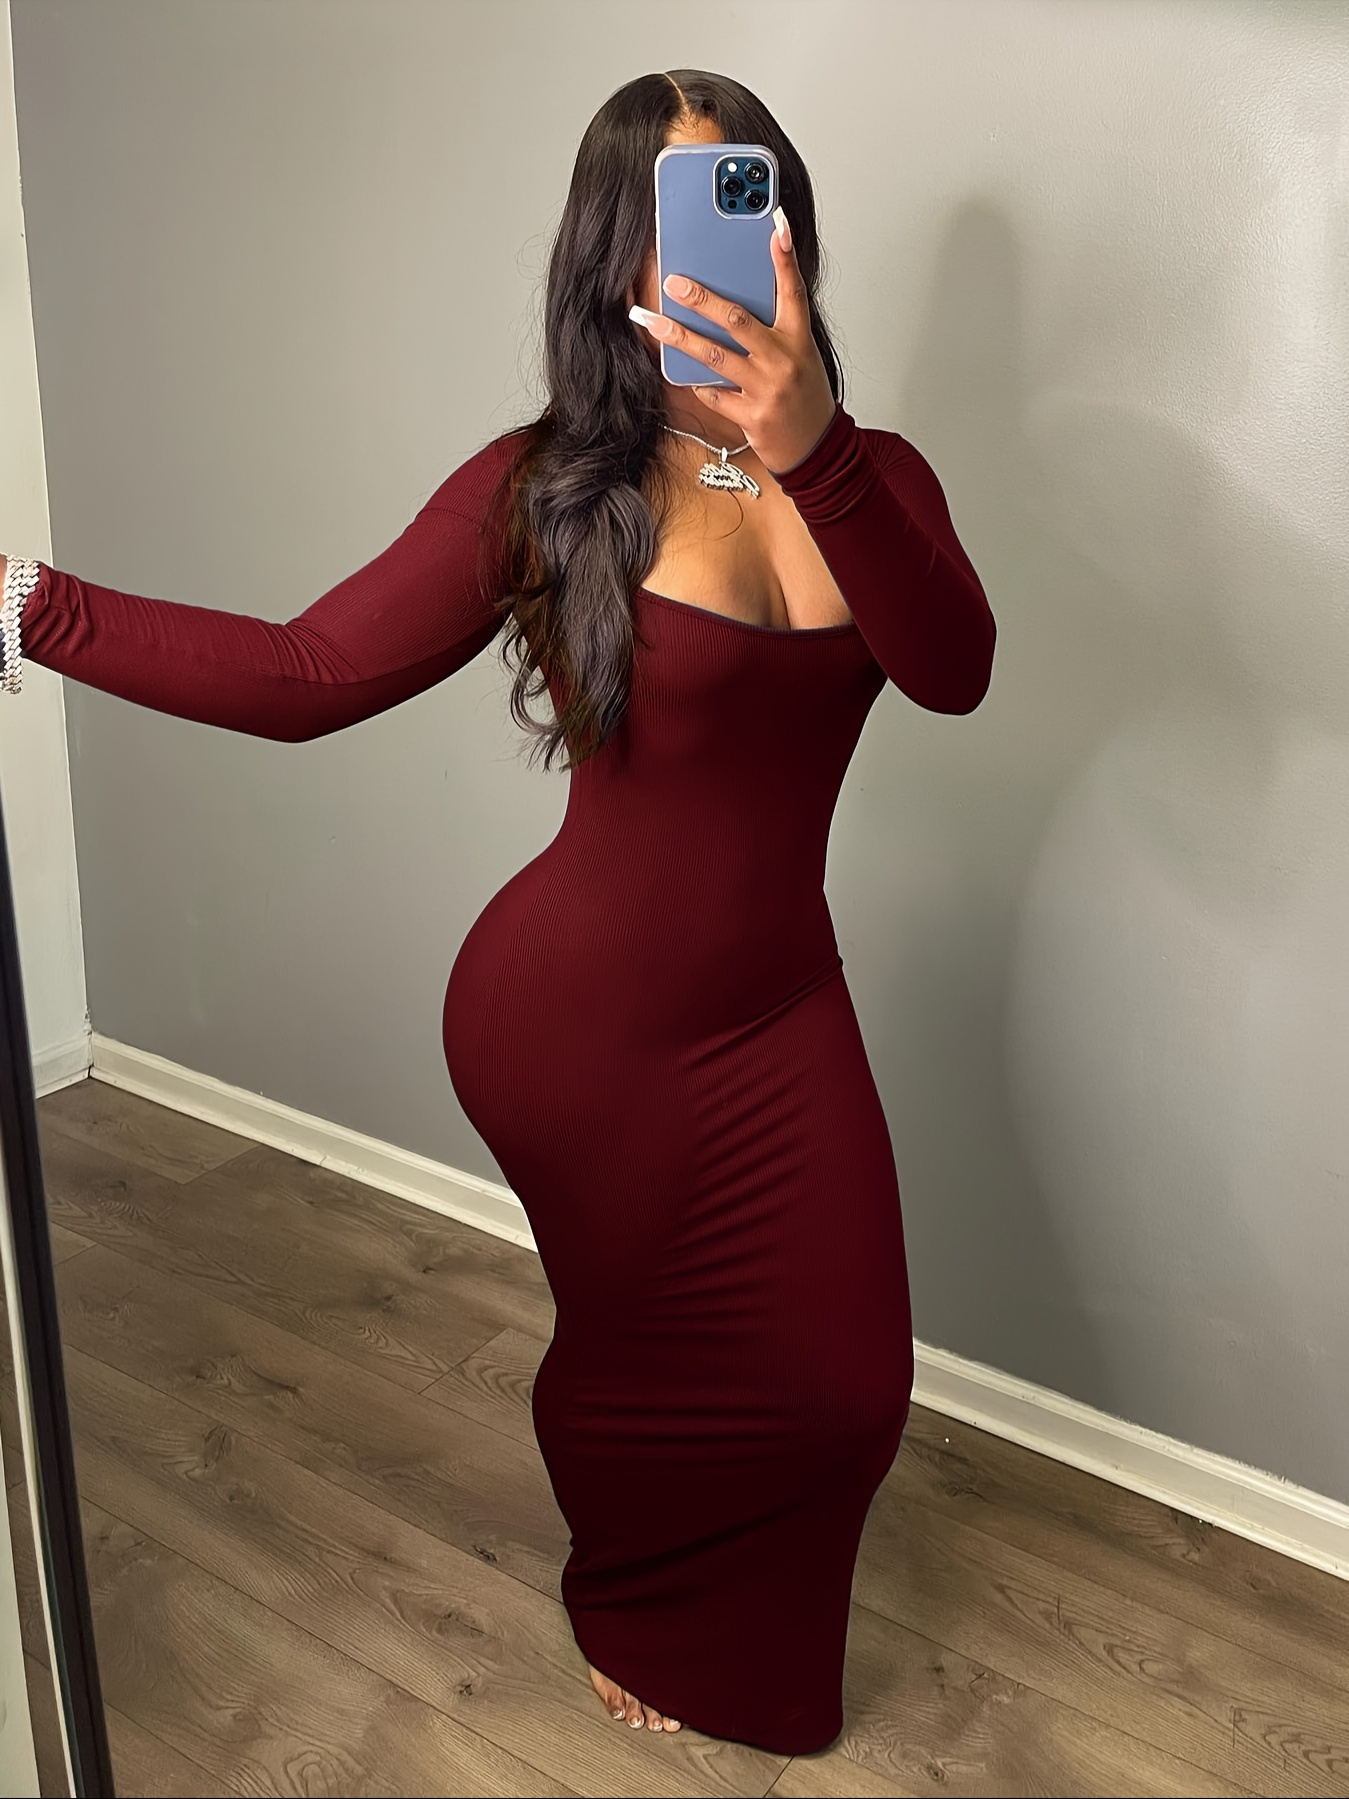 Bodycon Dresses - Tight Dresses & Form Fitting Dresses